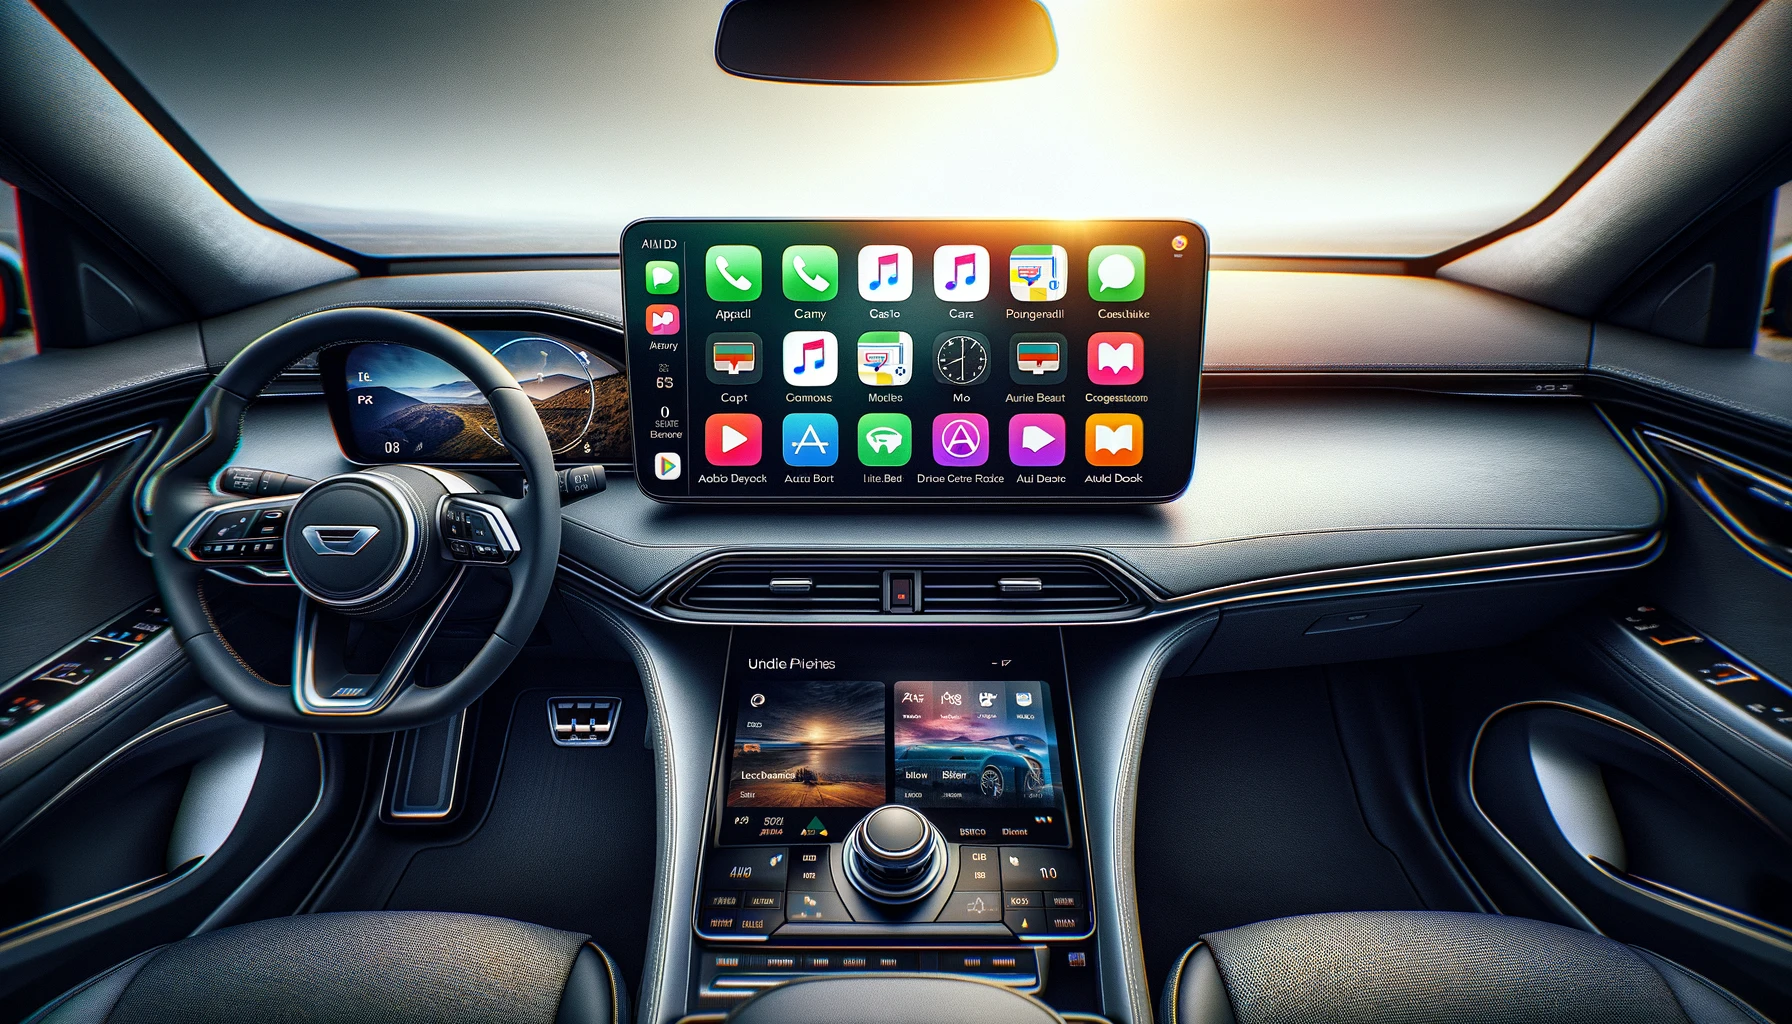 A wide-angle view of a car interior during the day, showcasing a large dashboard screen divided between Apple CarPlay and Android Auto interfaces.